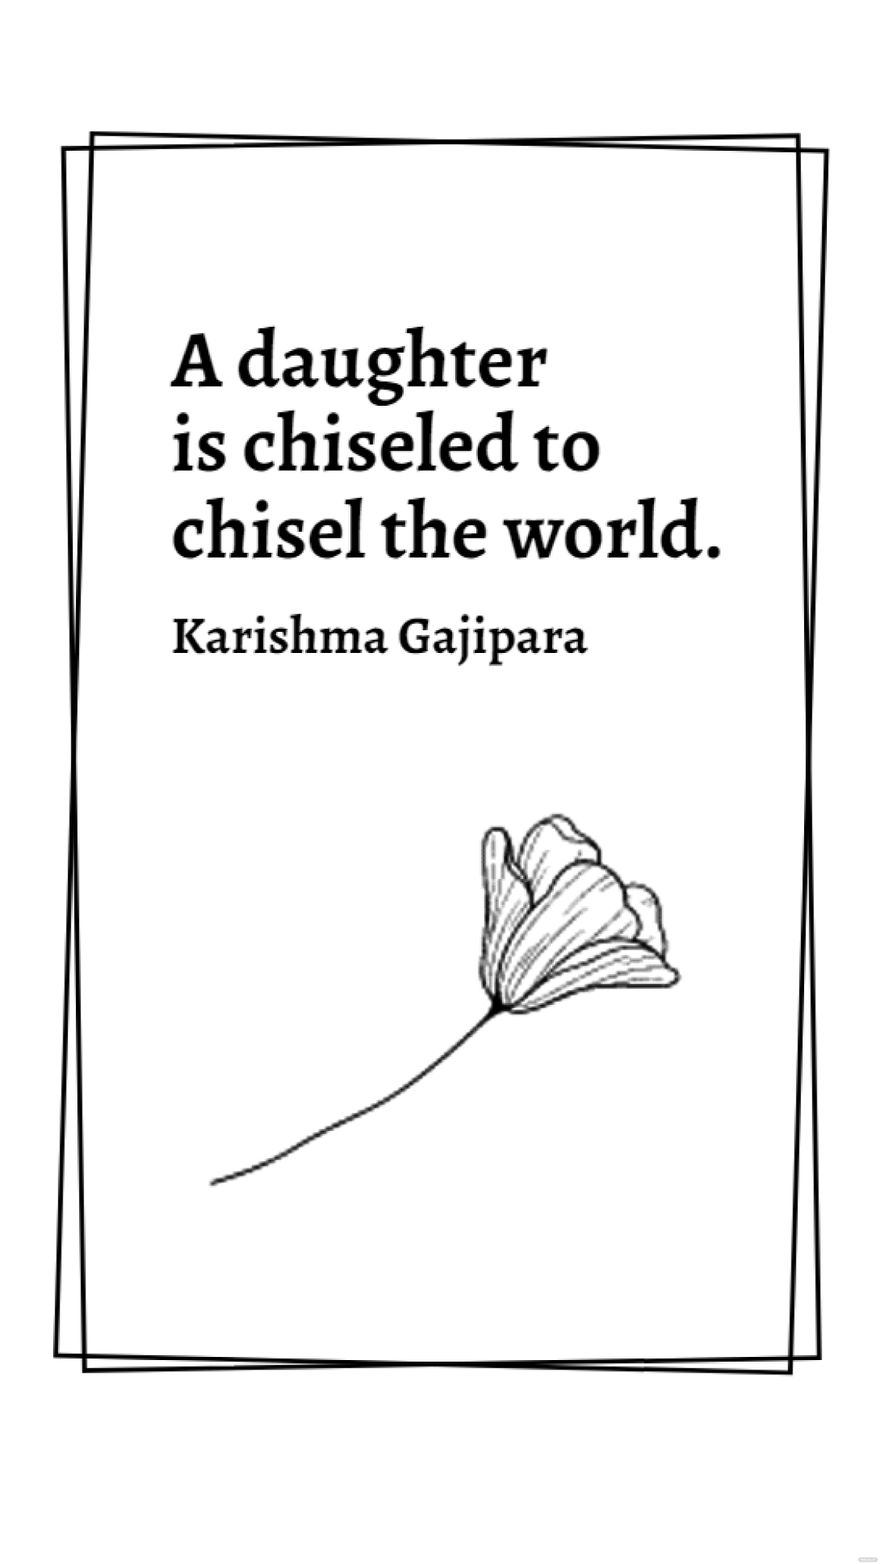 Free Karishma Gajipara - A daughter is chiseled to chisel the world. in JPG